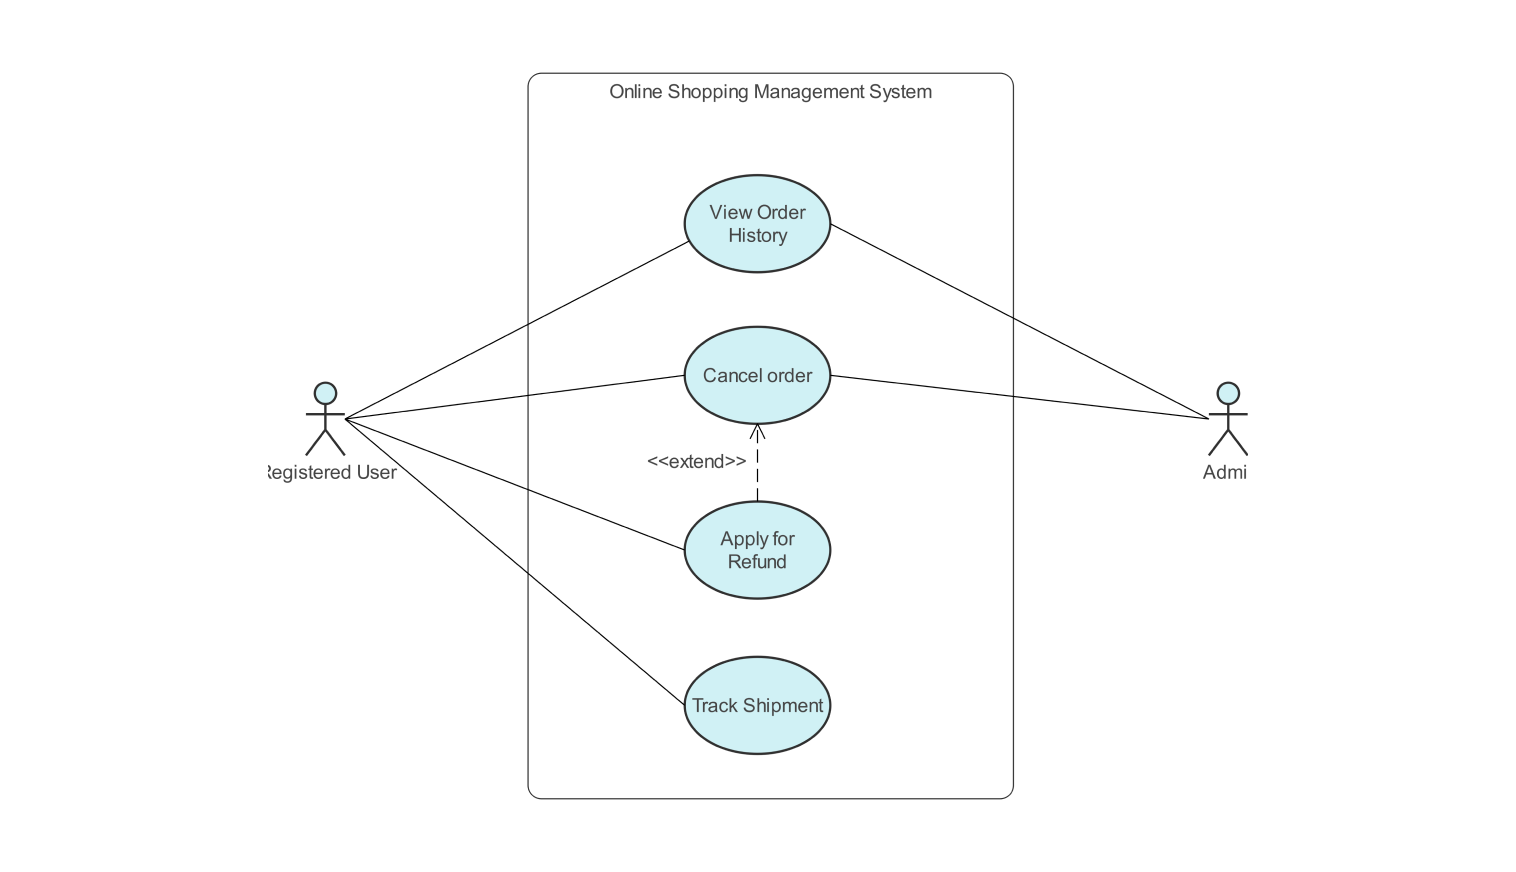 Use Case diagram for order history